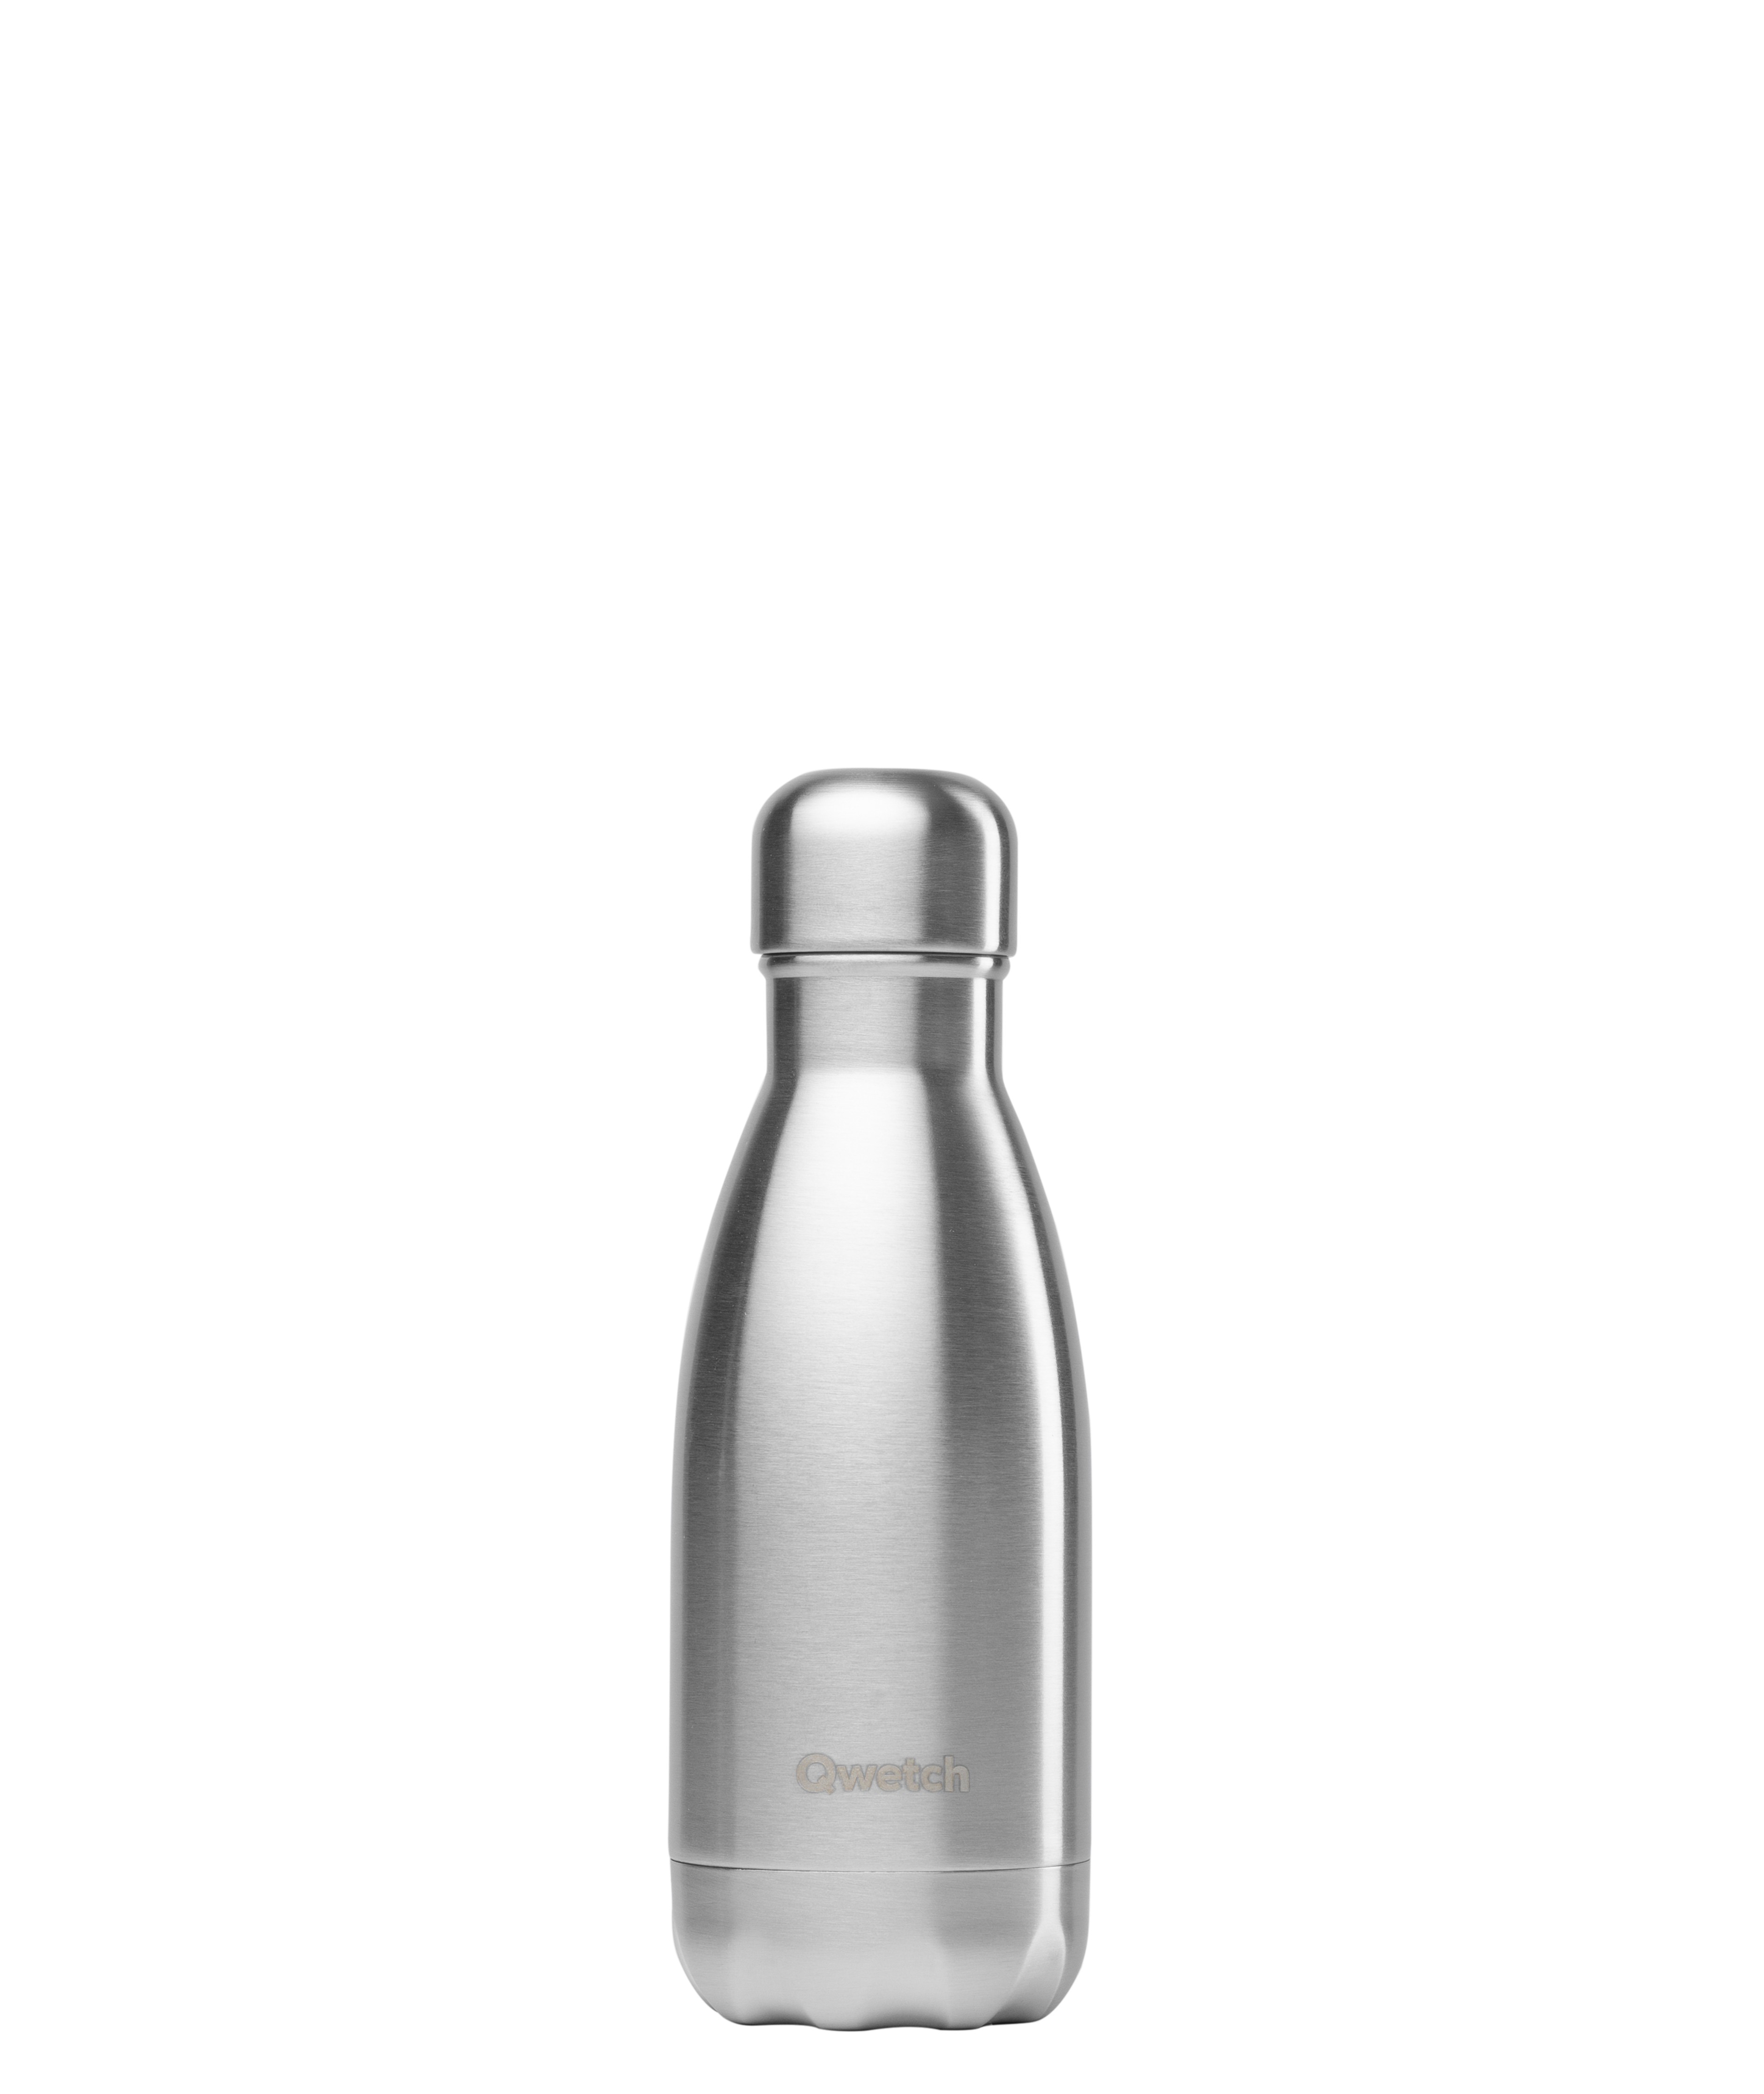 Qwetch Bouteille isotherme inox brossé 260ml - 10000